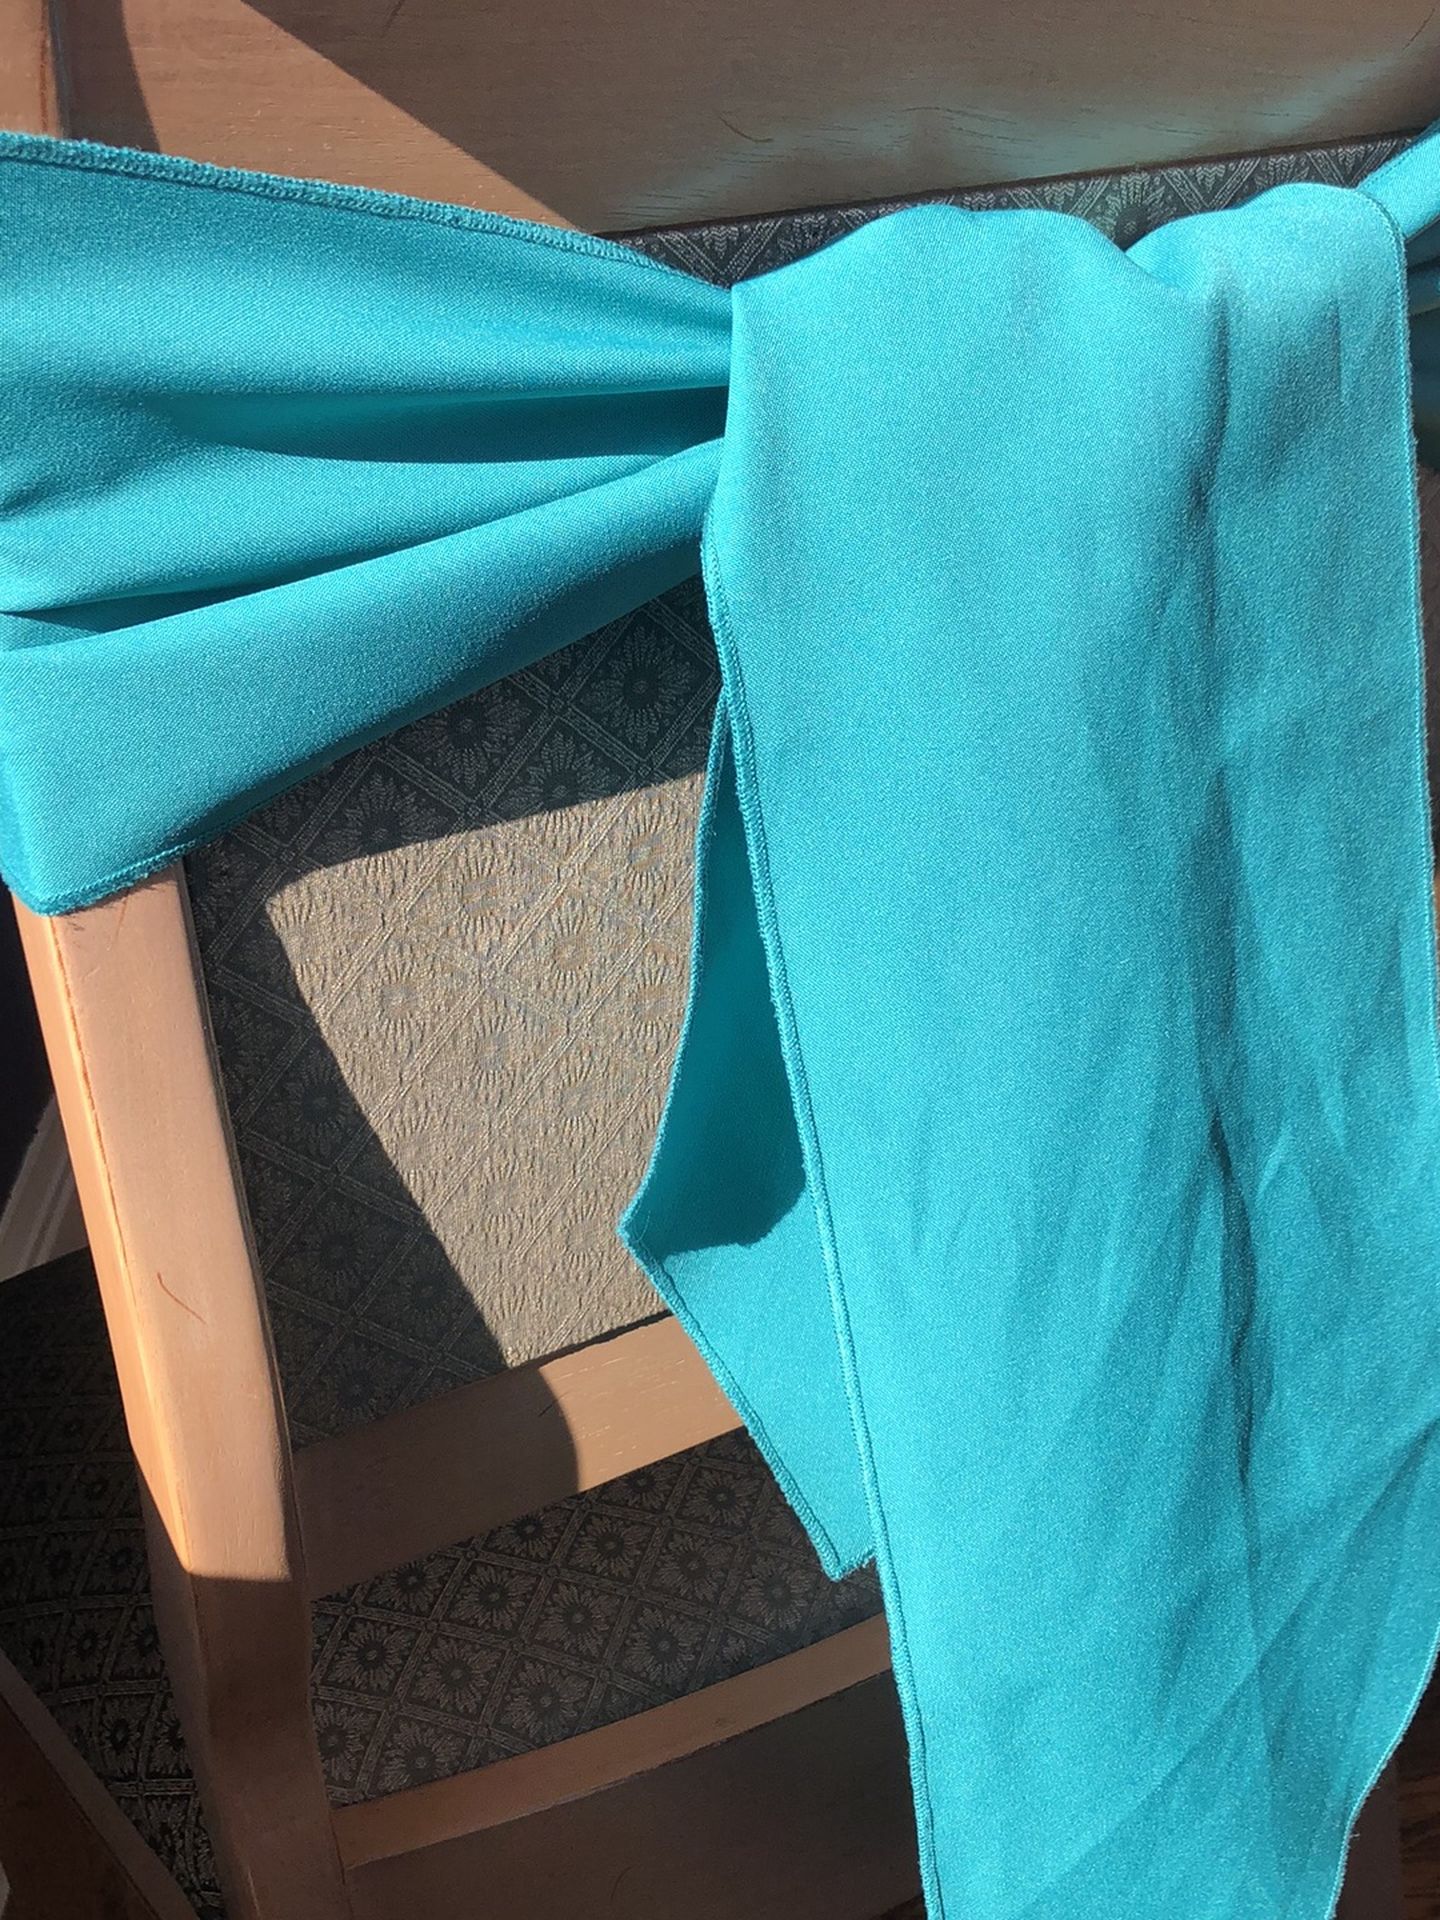 11 turquoise chair sashes